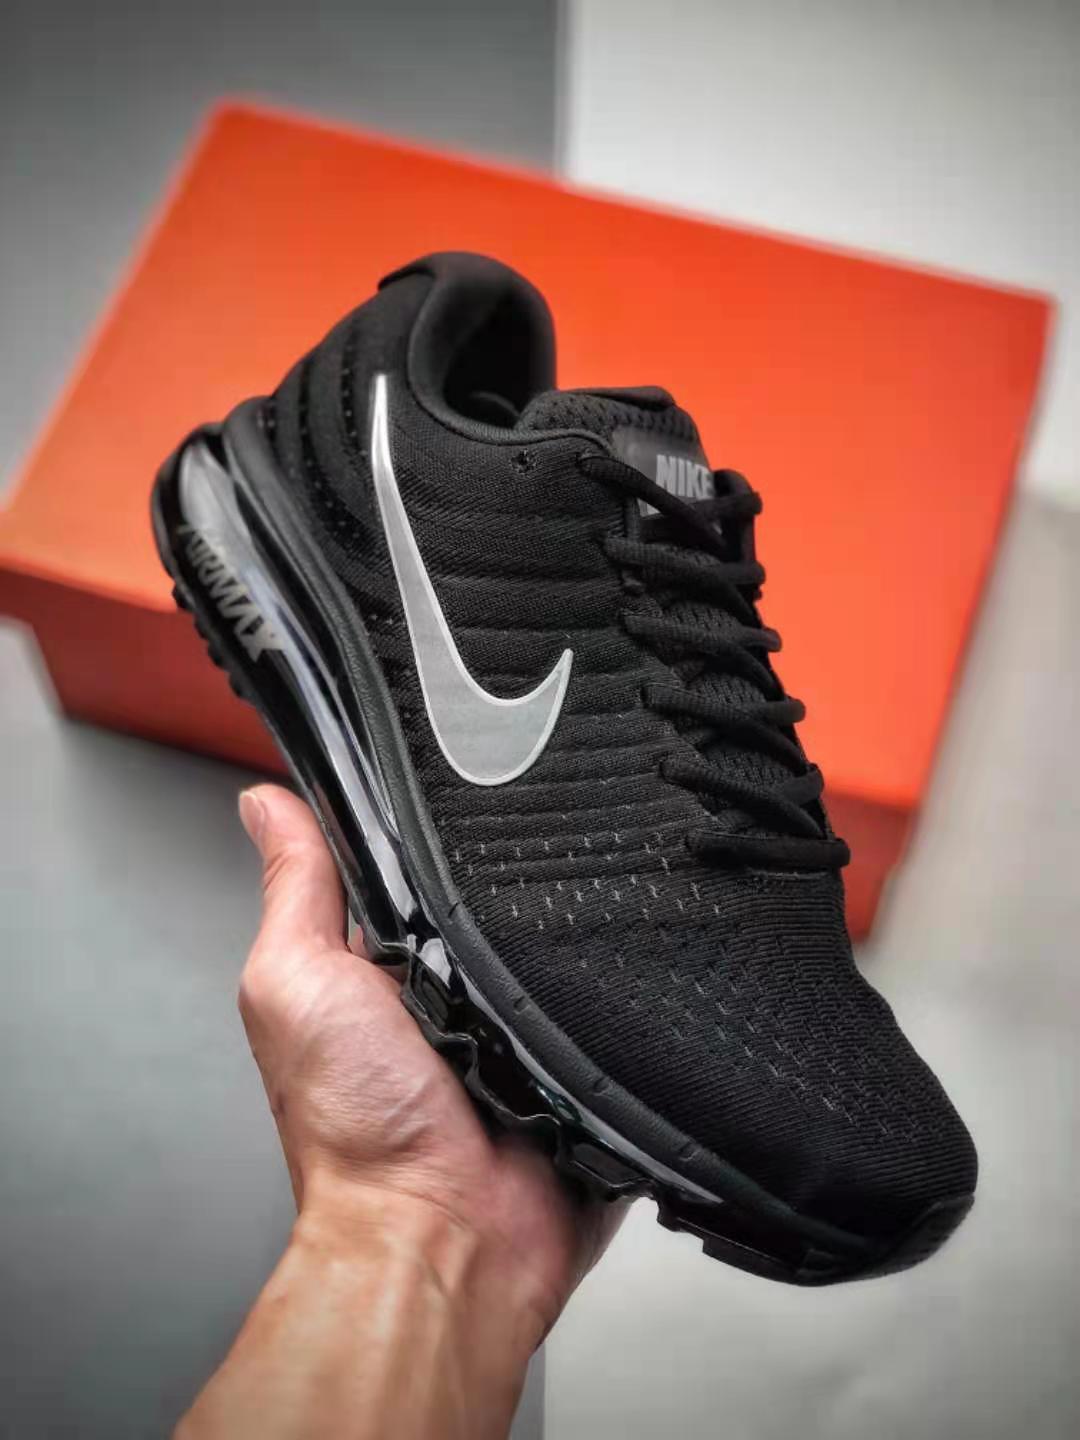 Nike Air Max 2017 'Black' 849559-001 - Latest Release, Supreme Comfort | Free Shipping | Limited Stock.